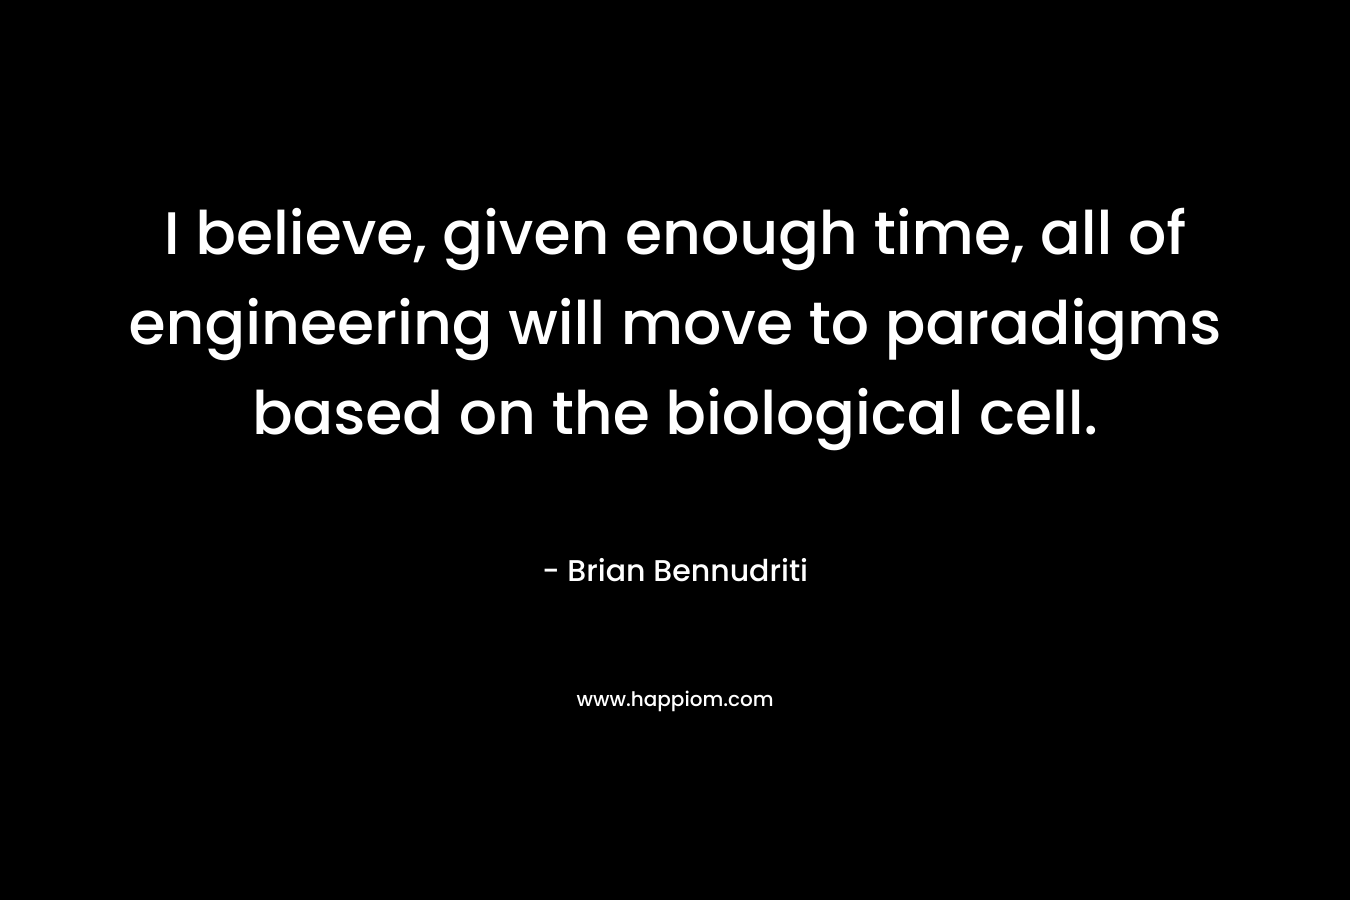 I believe, given enough time, all of engineering will move to paradigms based on the biological cell. – Brian Bennudriti